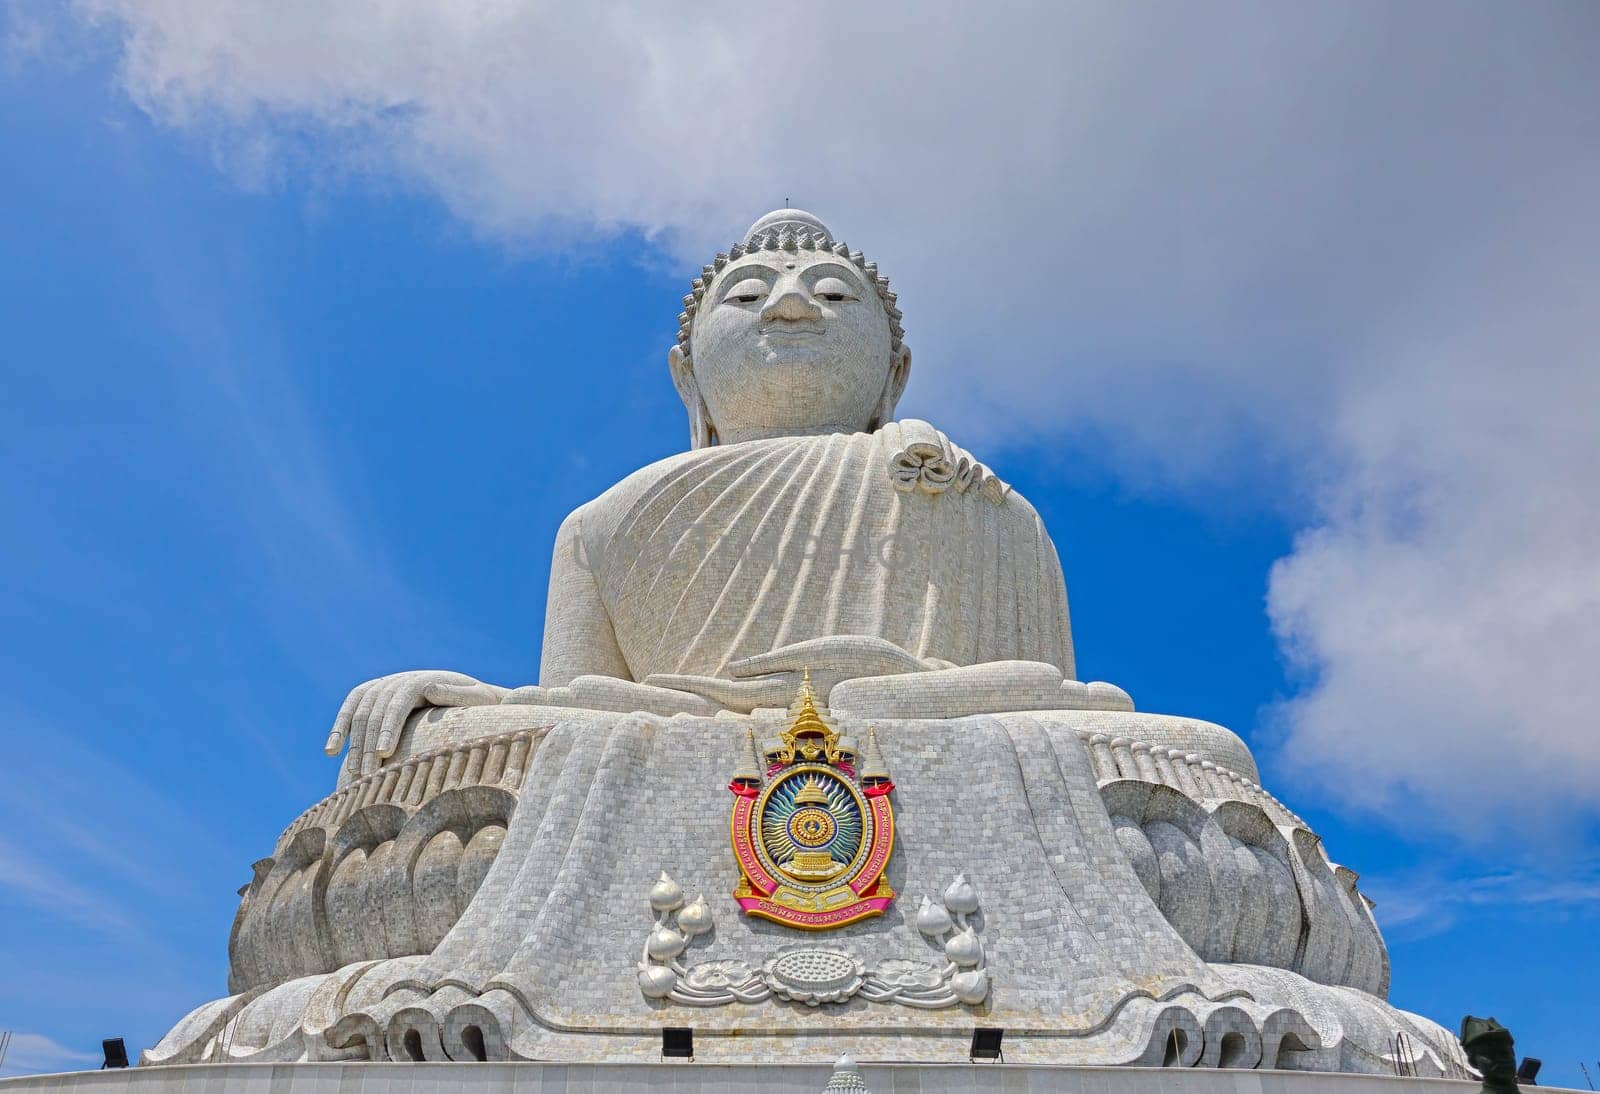 Famous statue of Big Buddha made of marble by day in Phuket, Thailand